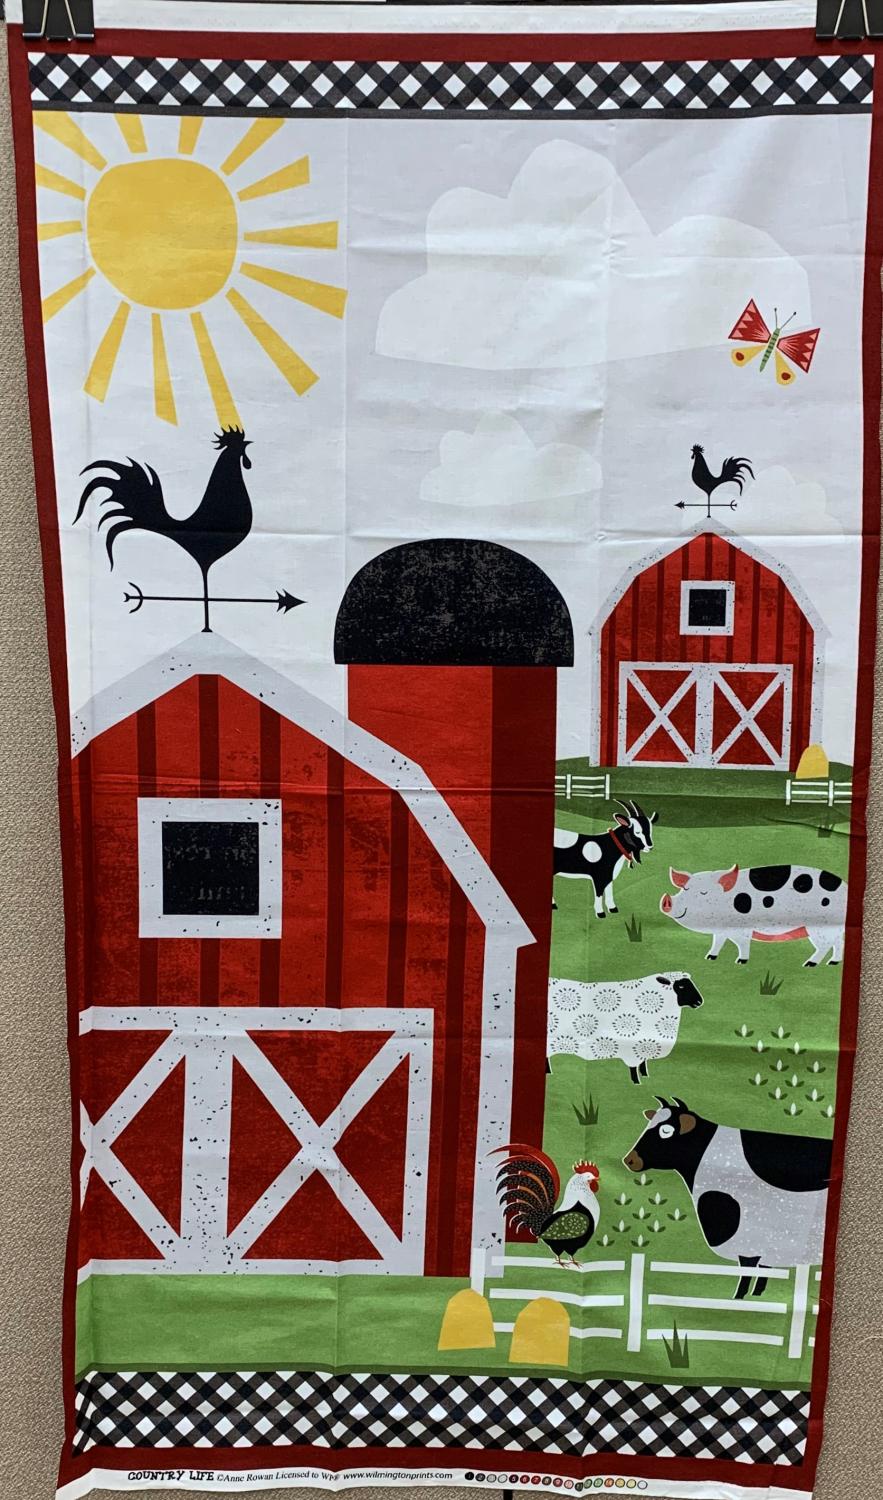 A big red barn is the focal point for this country life panel. Farm animals grazing in the grass while the bright sun shines above.